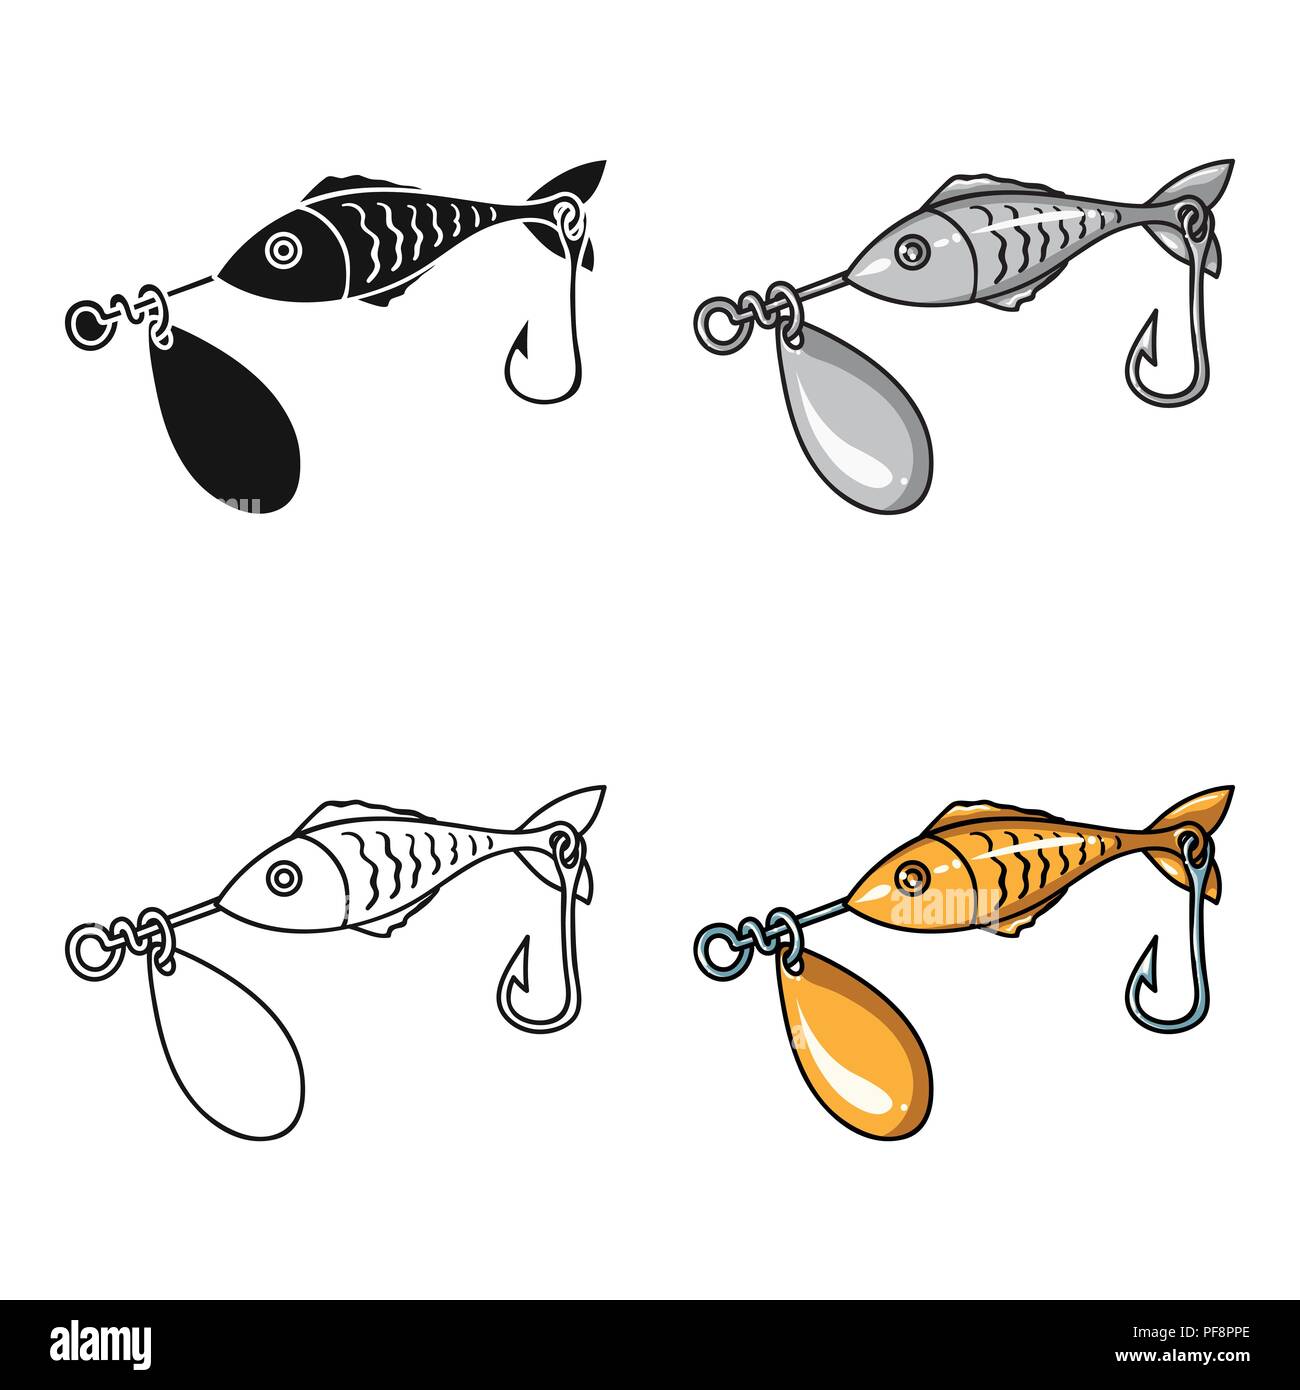 https://c8.alamy.com/comp/PF8PPE/fishing-bait-icon-in-cartoon-design-isolated-on-white-background-fishing-symbol-stock-vector-illustration-PF8PPE.jpg